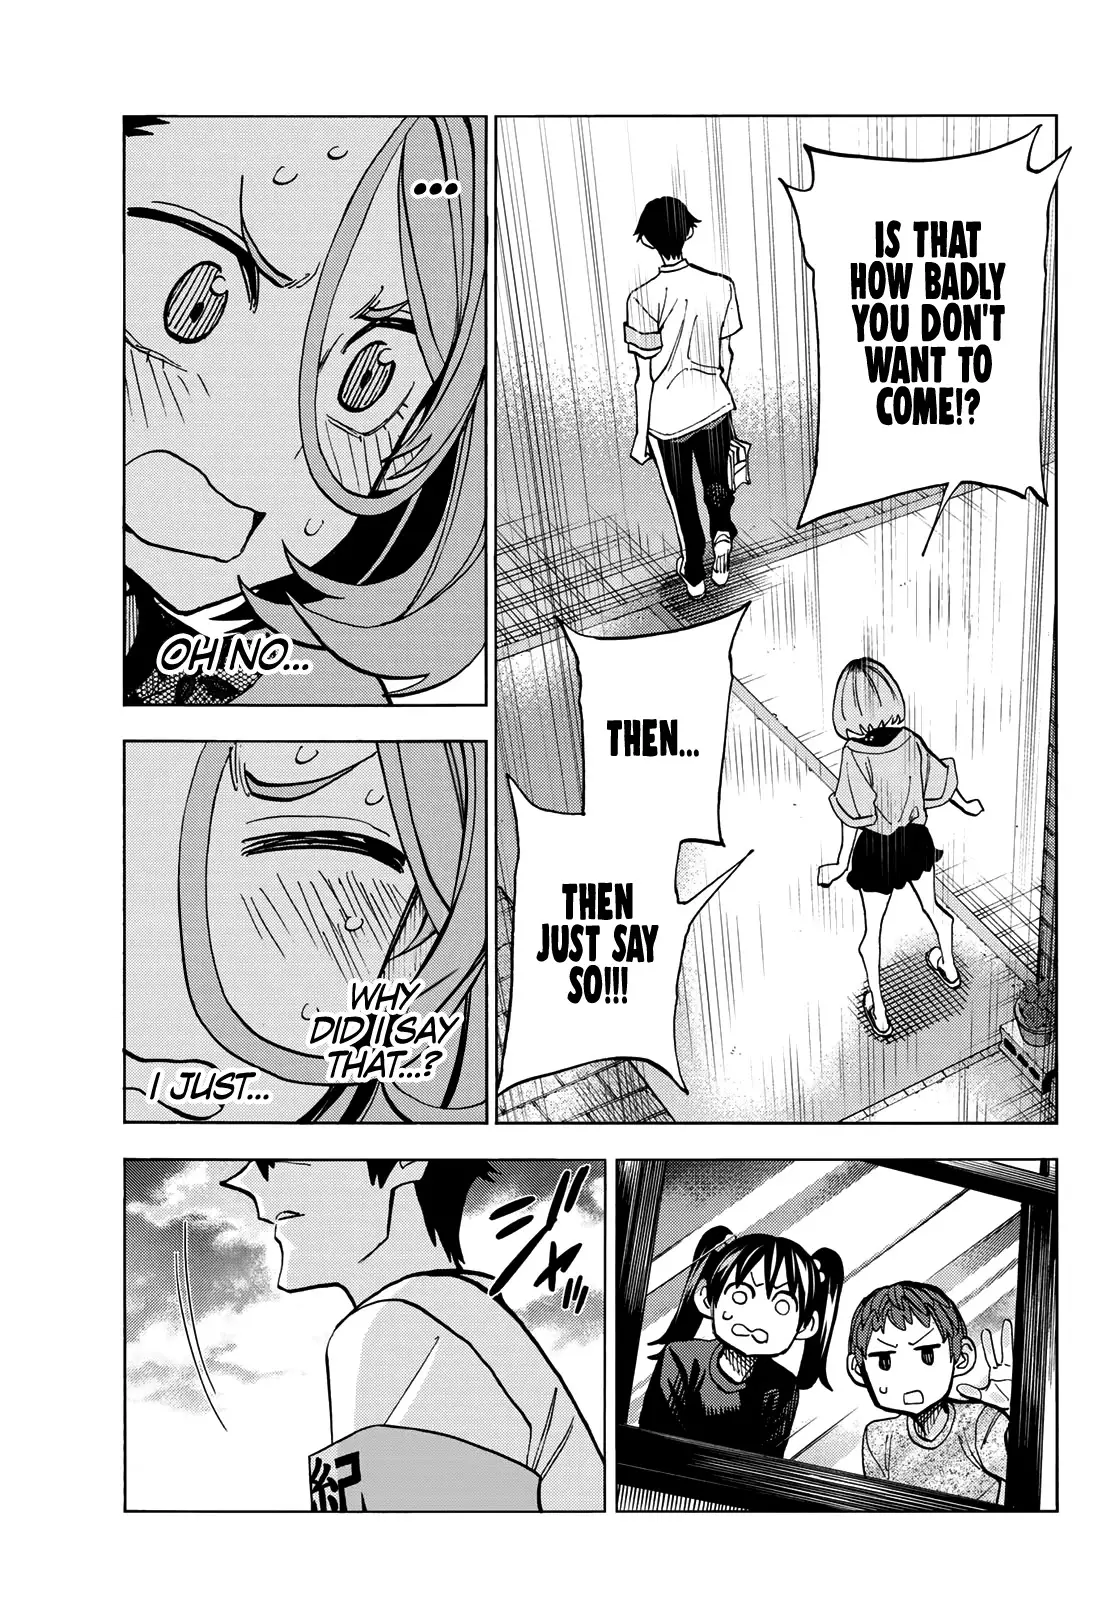 The Story Between A Dumb Prefect And A High School Girl With An Inappropriate Skirt Length - 16 page 14